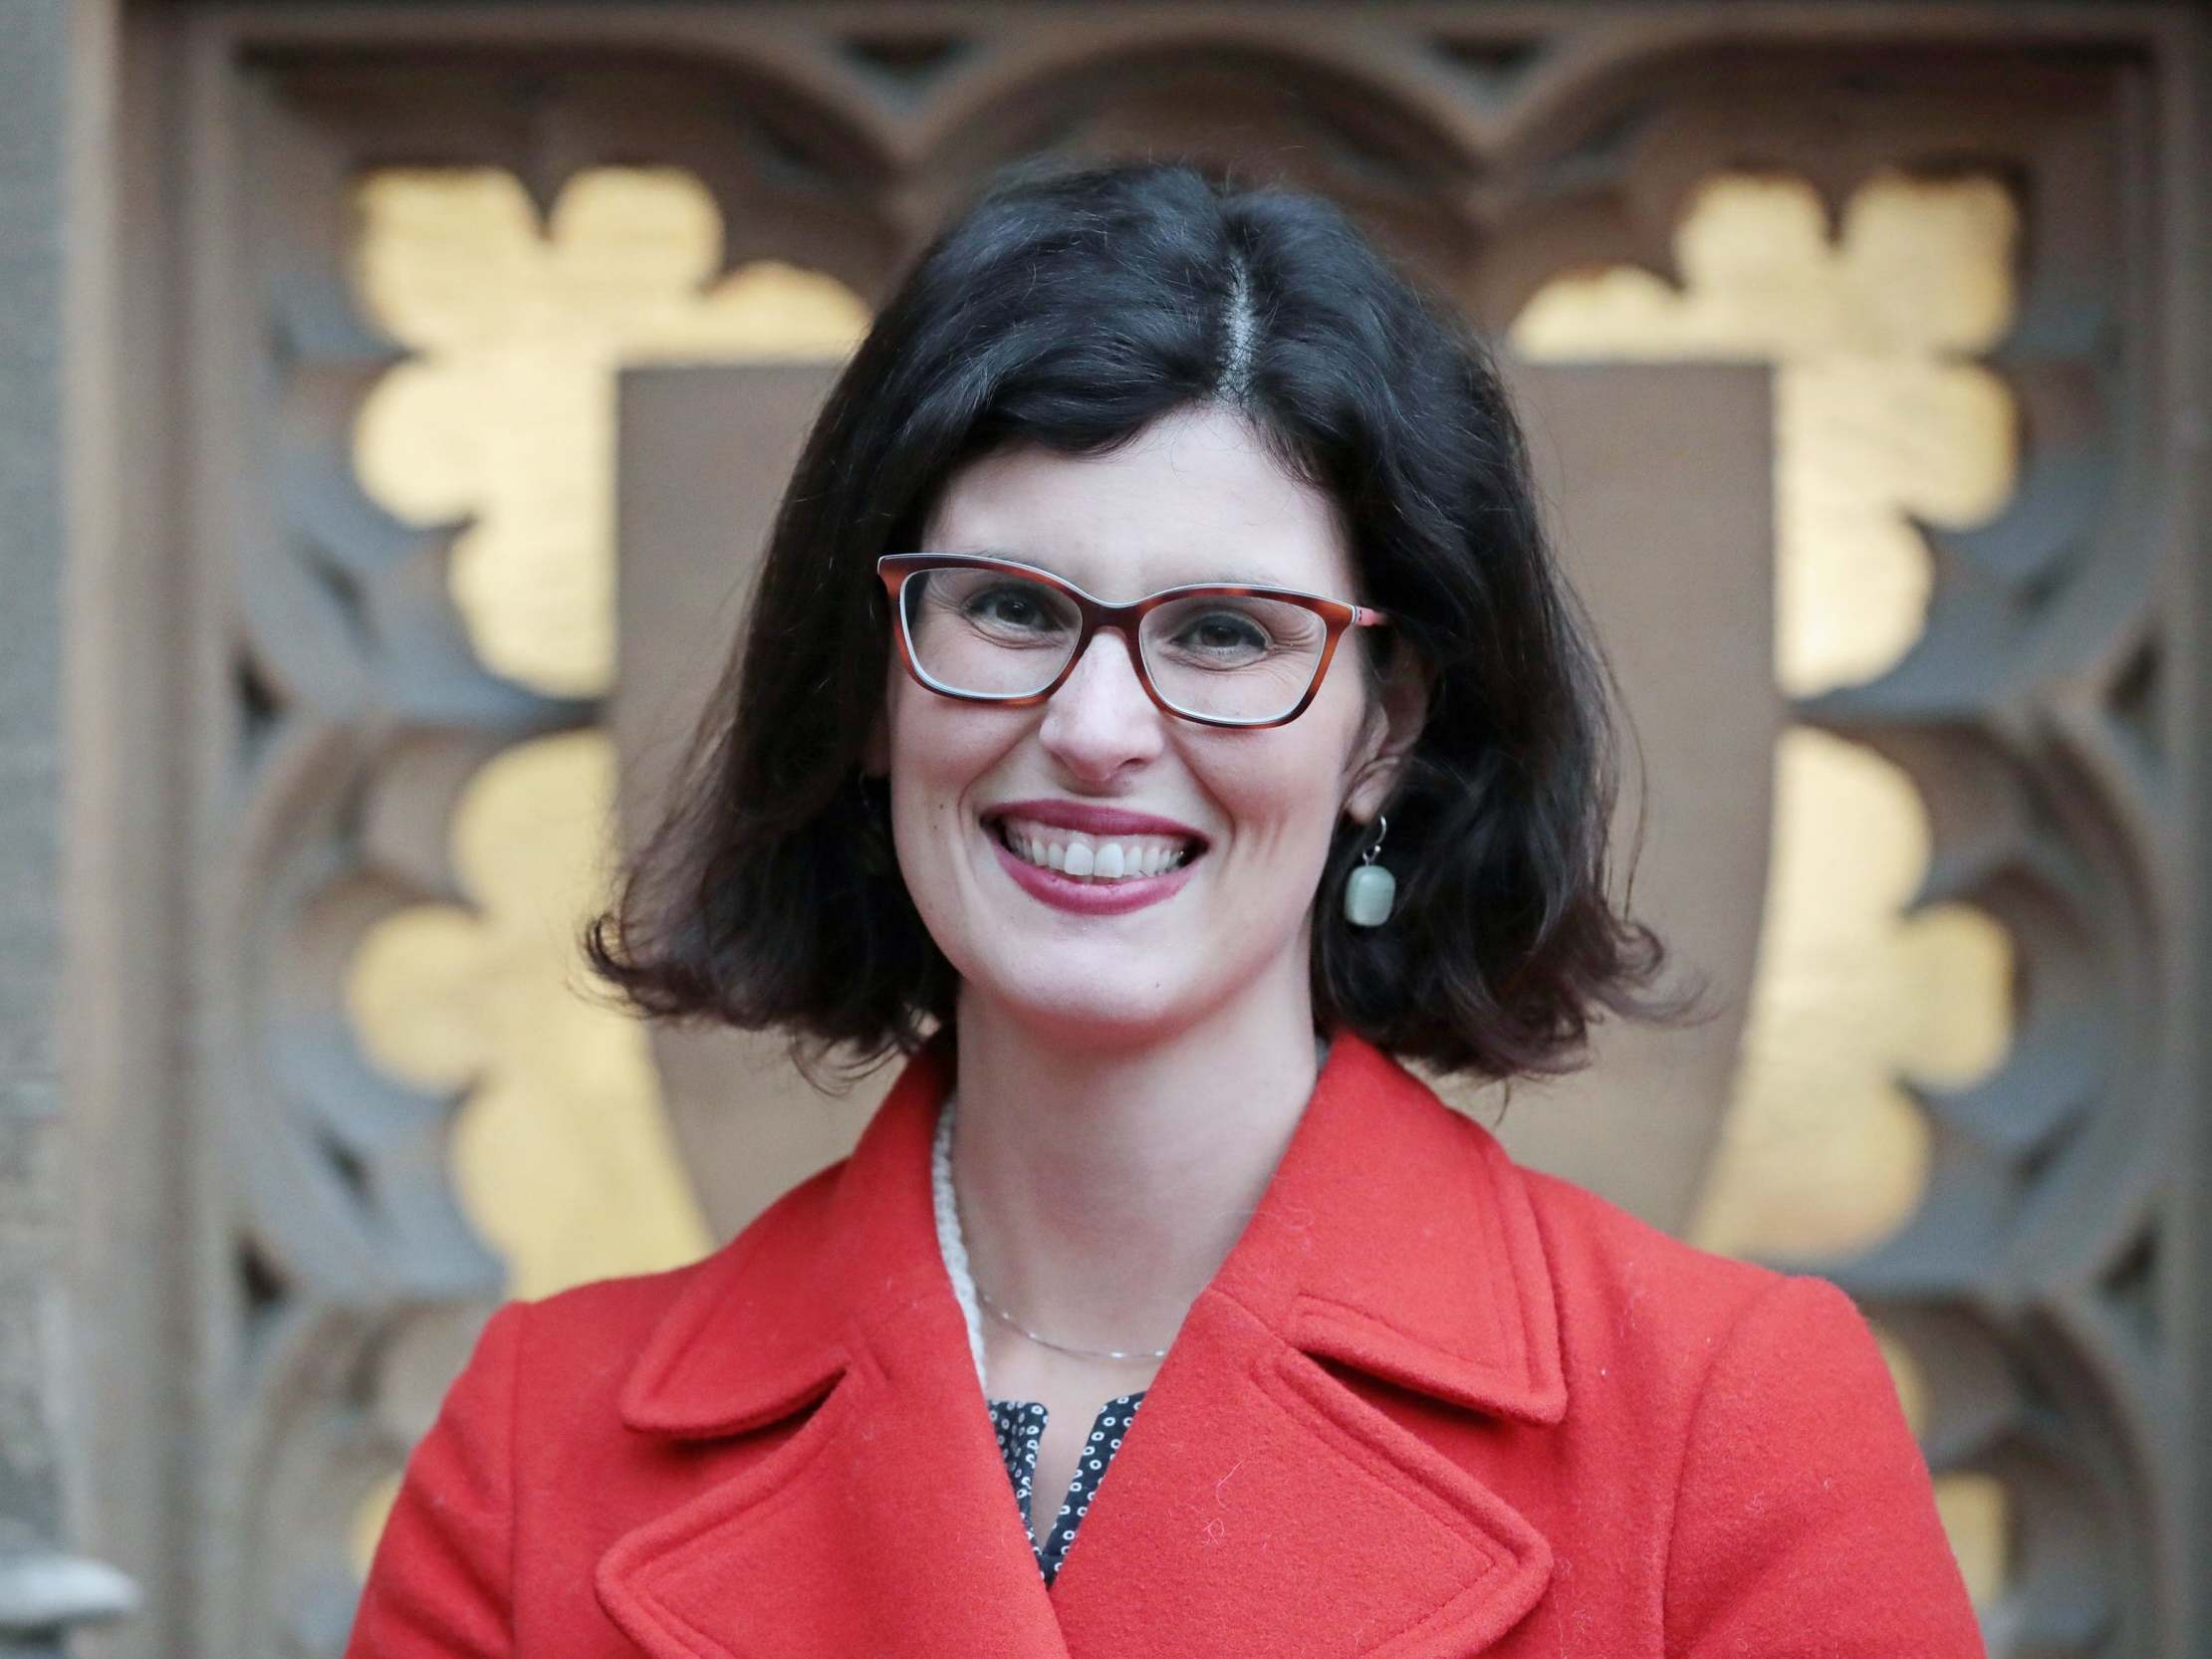 Congratulations to Layla Moran for falling in love – and making pansexuality mainstream